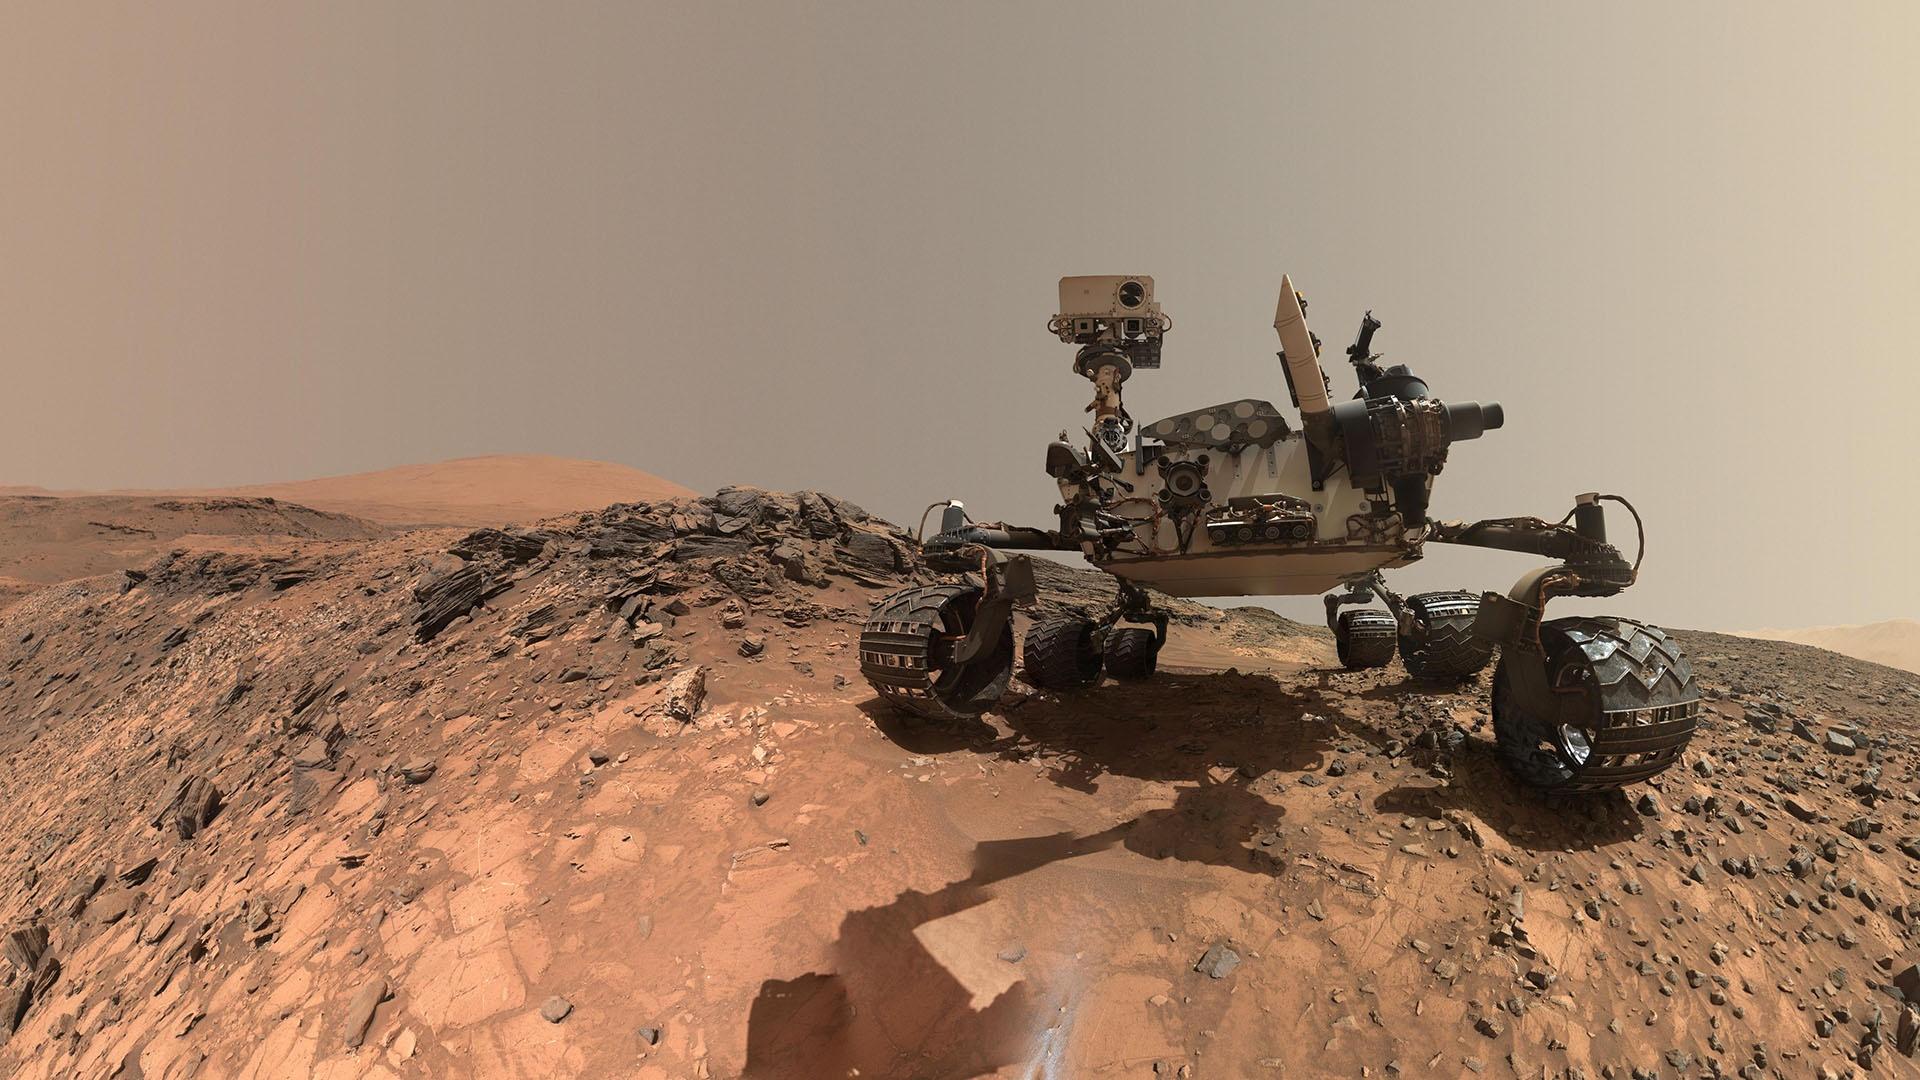 Mars Rover Curiosity takes a selfie on the Red Planet, c. 2015.